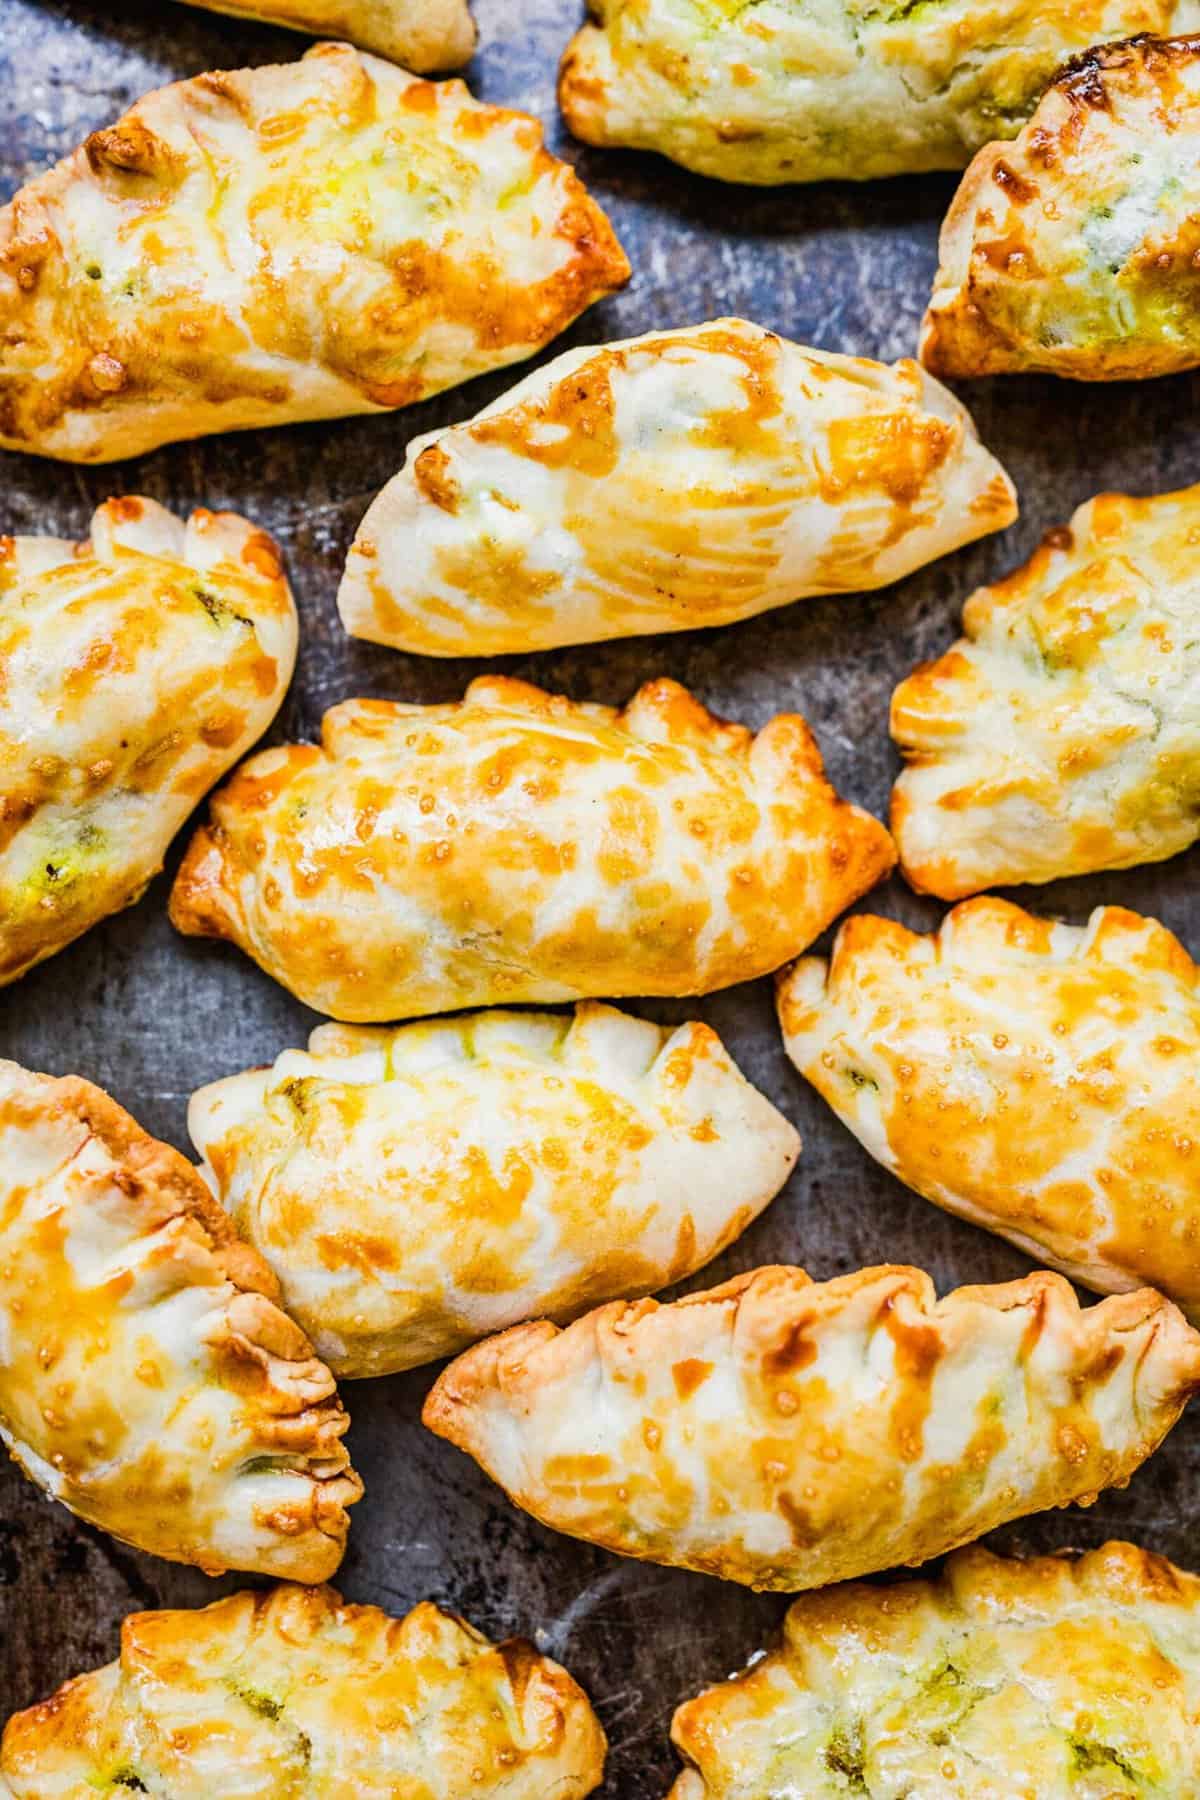 Overhead view of baked Chinese curry pockets on sheet pan